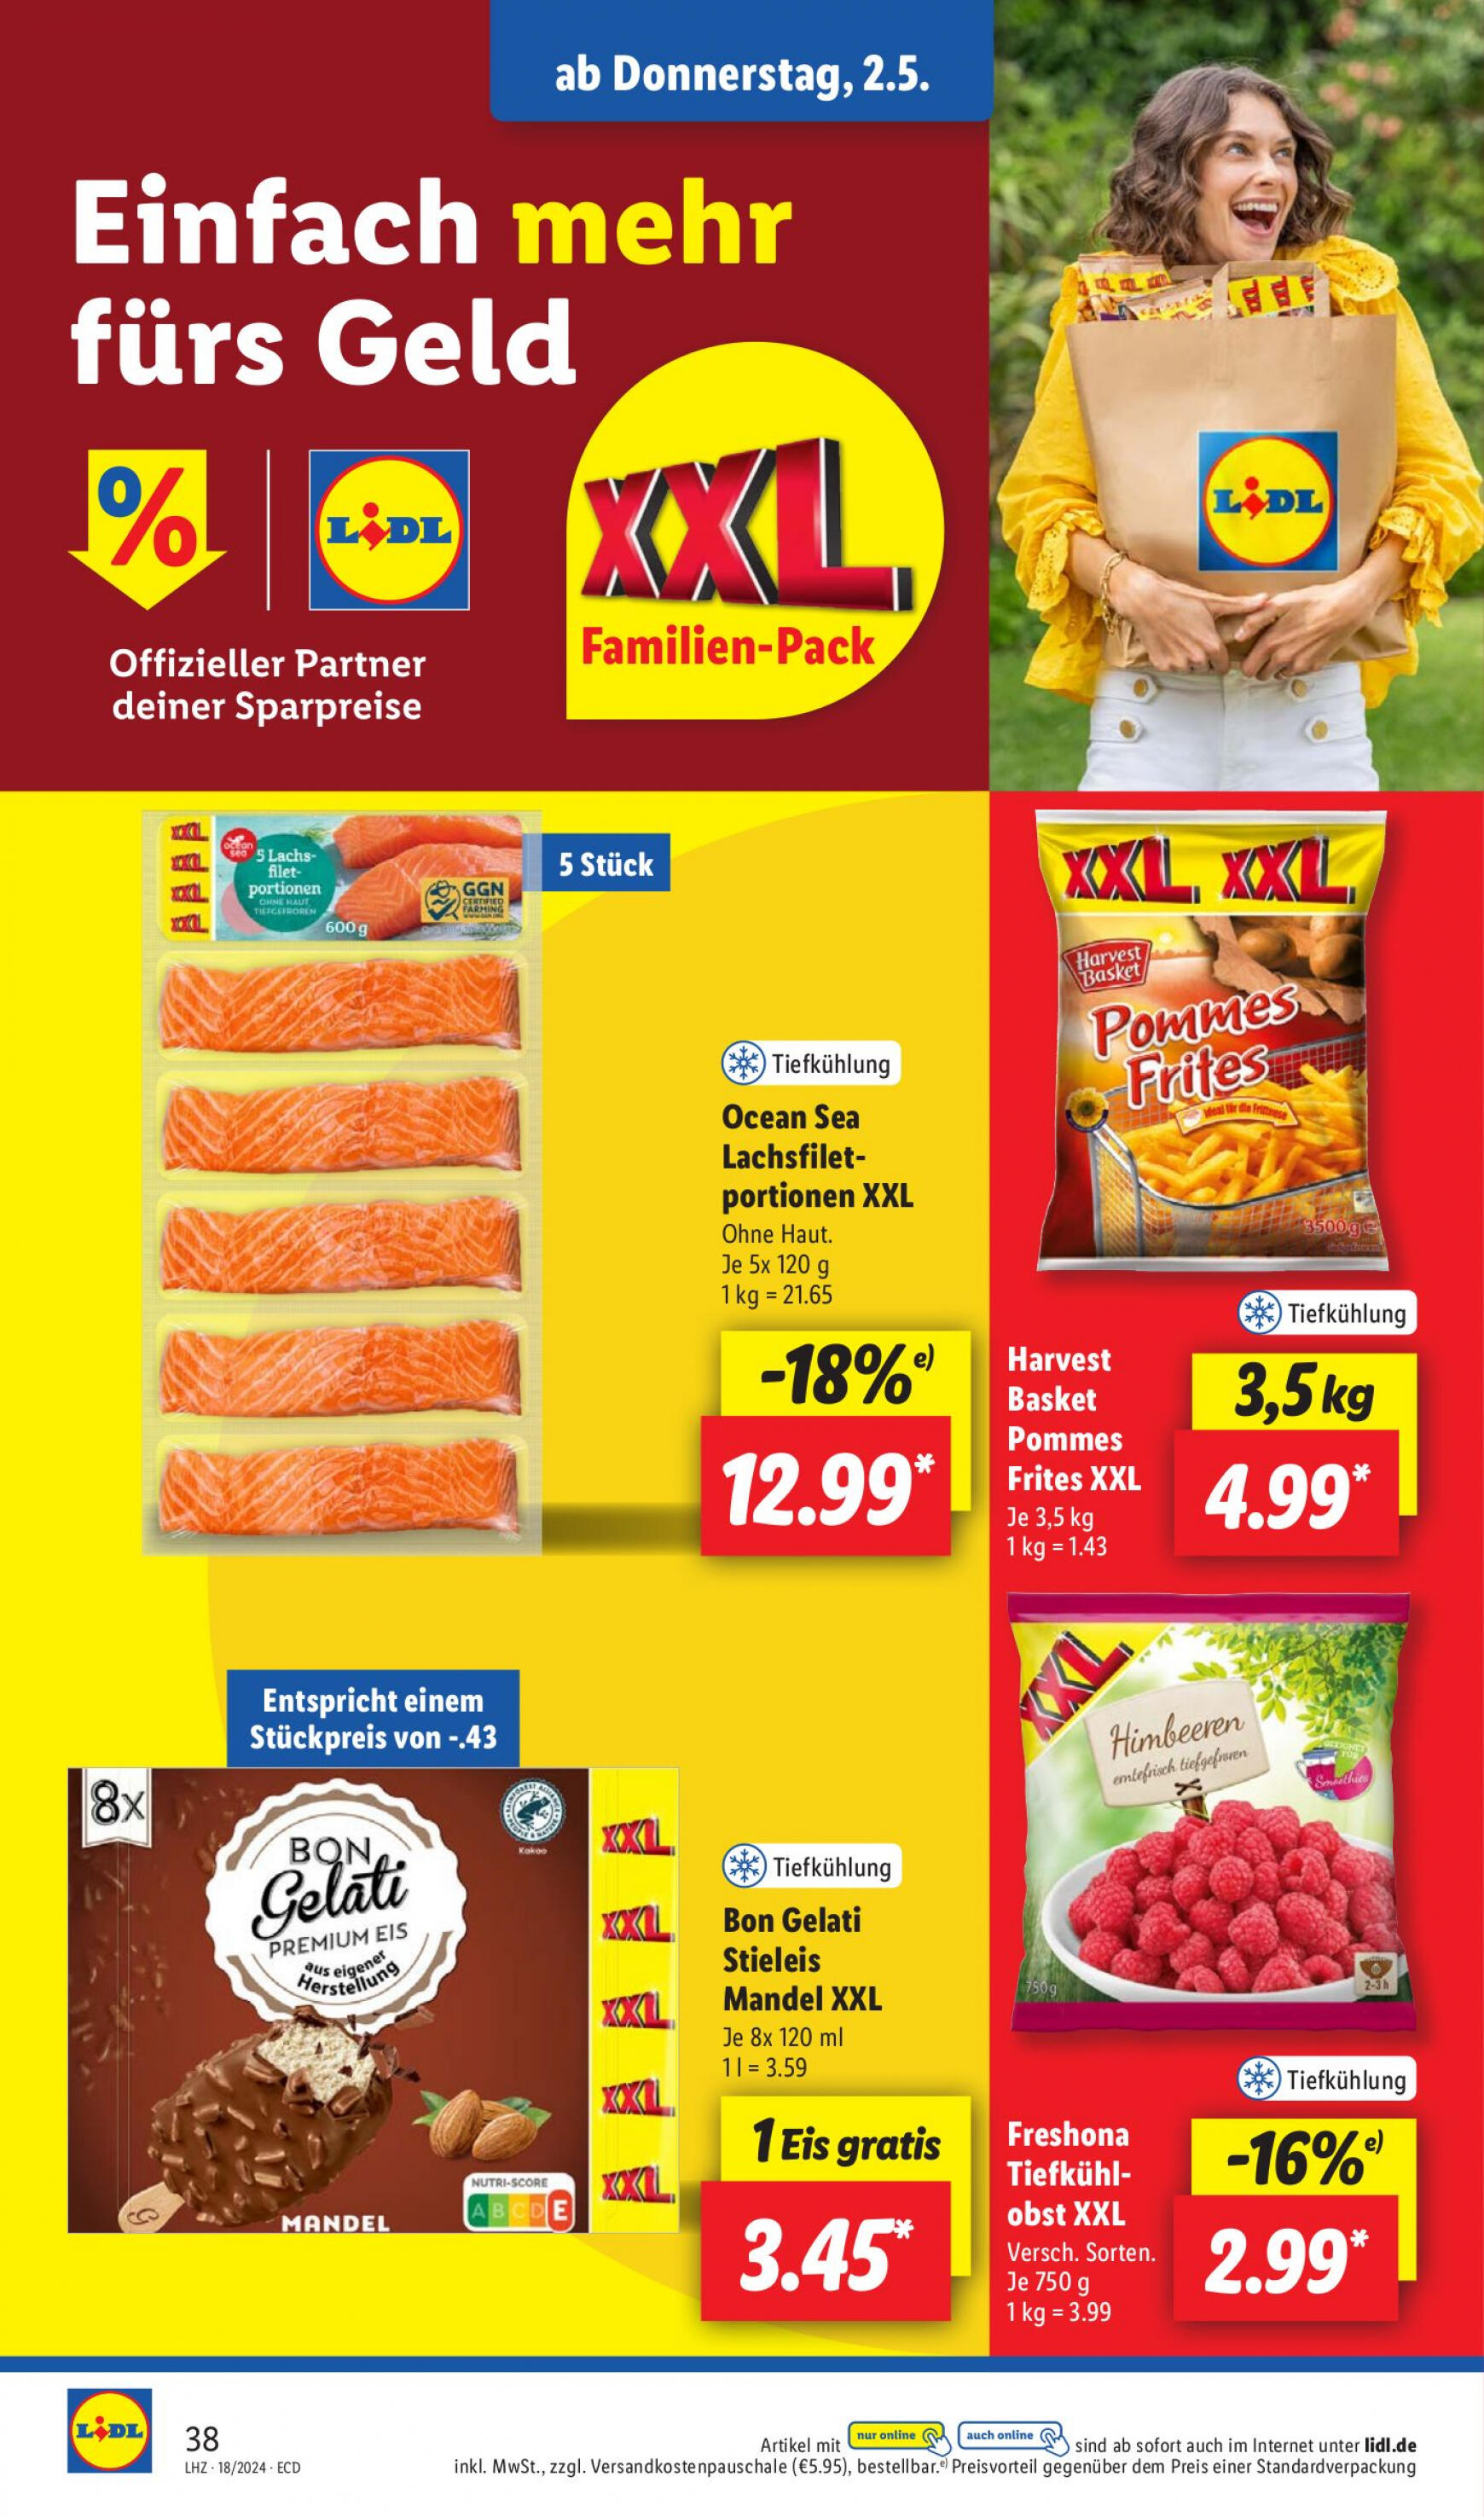 lidl - Flyer Lidl aktuell 29.04. - 04.05. - page: 46